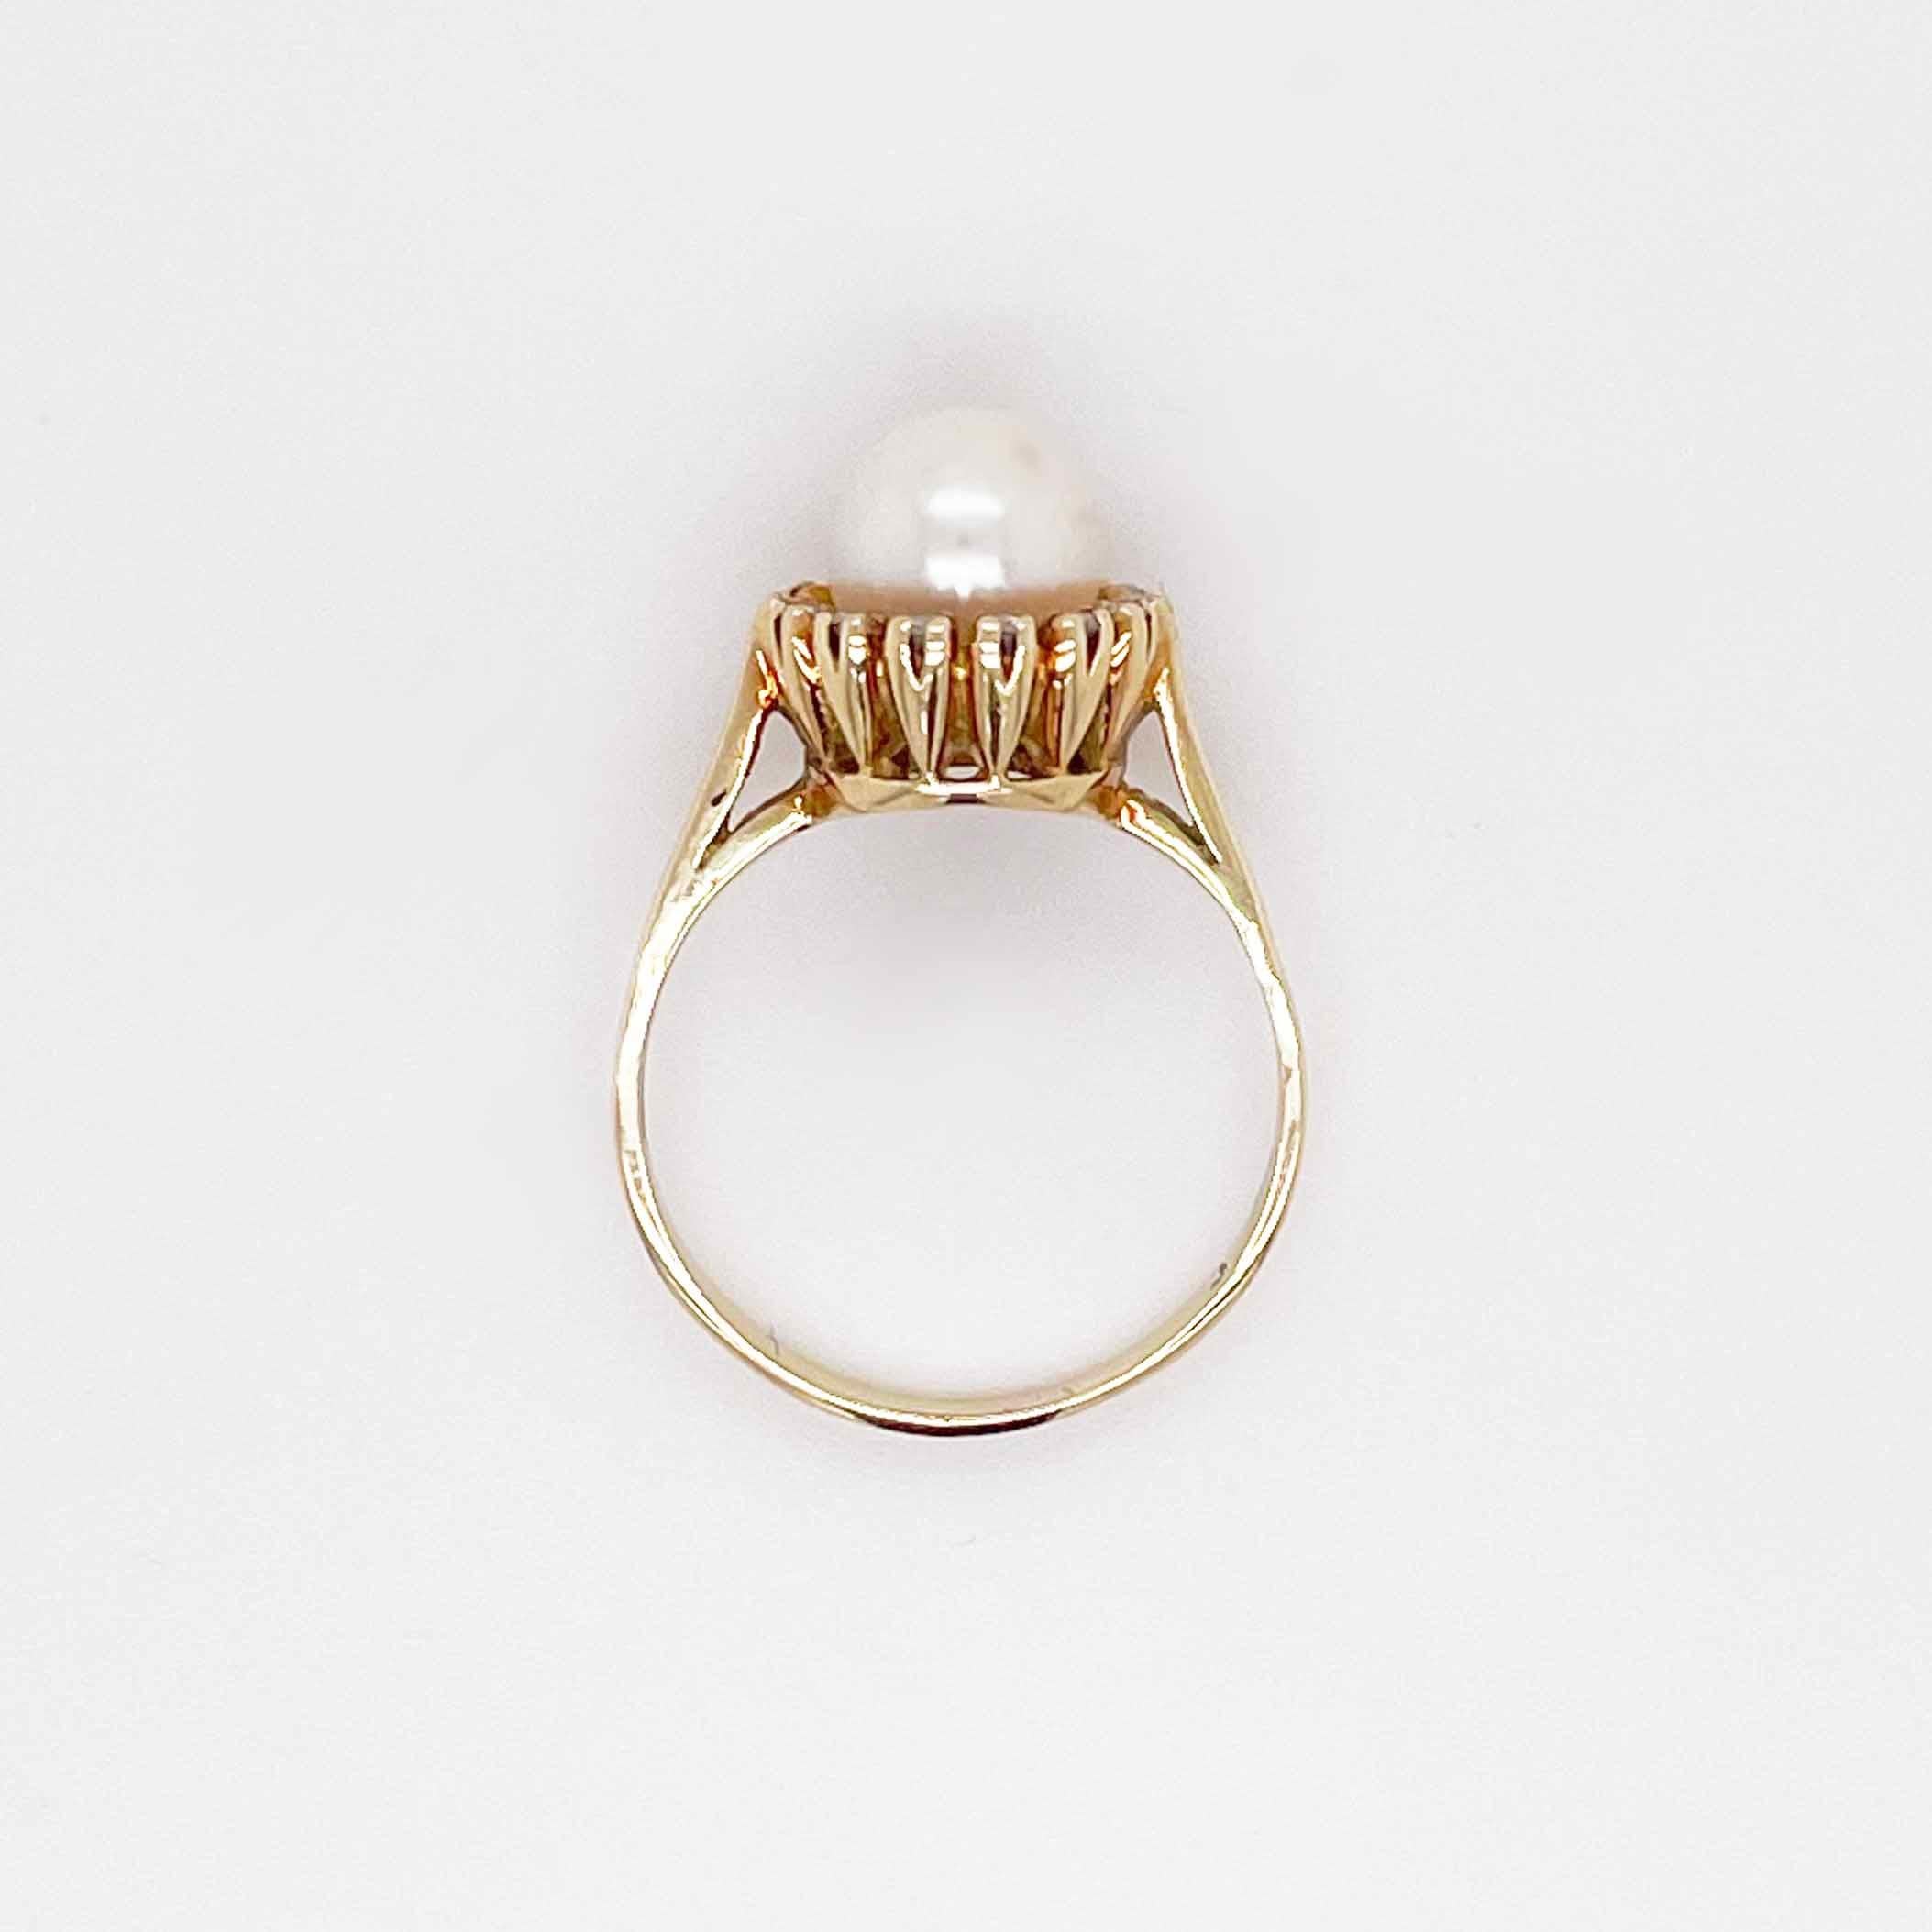 Round Cut Pearl Diamond Ring, Yellow Gold, Estate Cultured Pearl with Diamond Halo